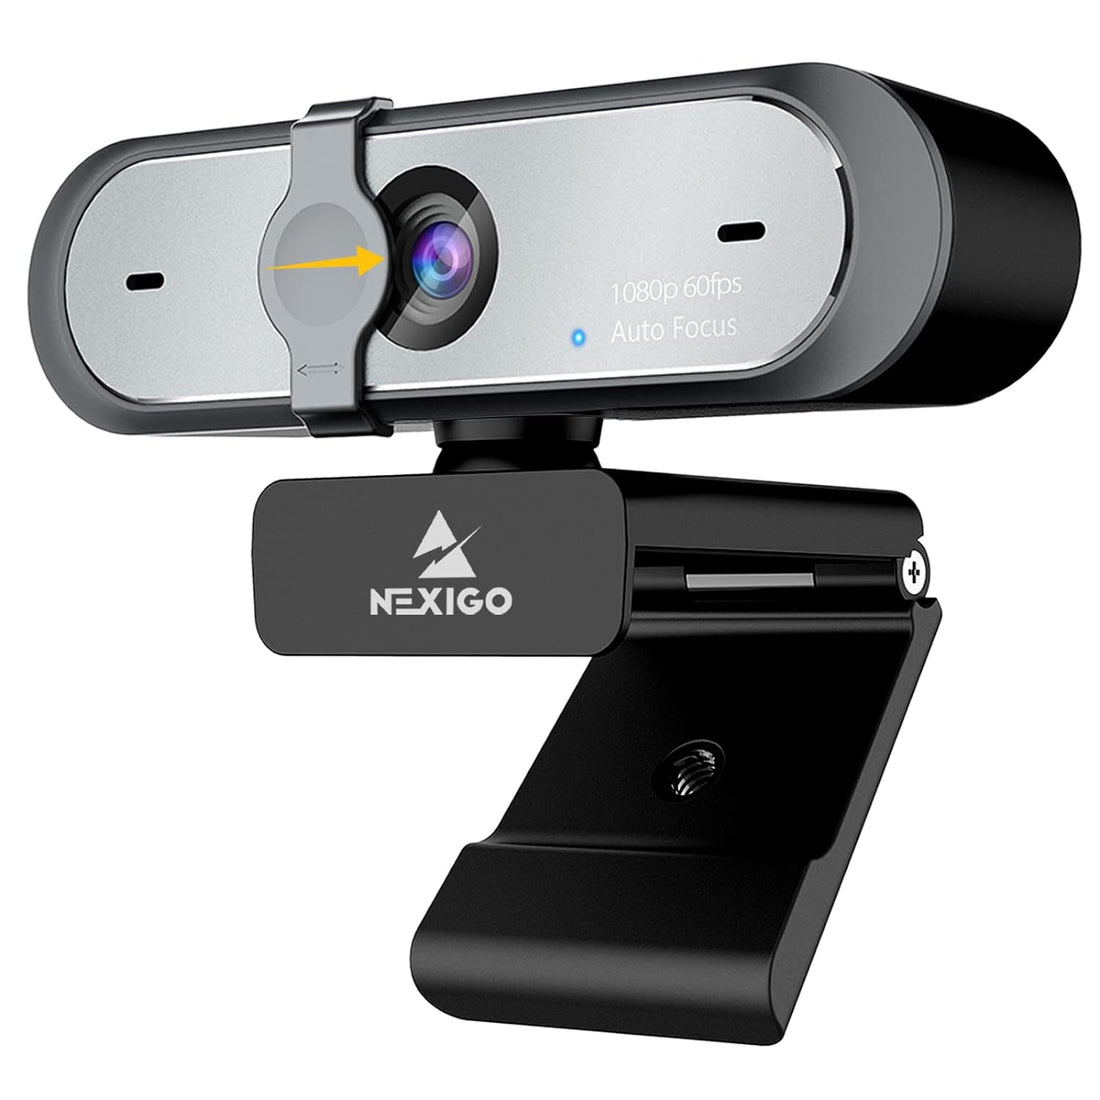 60FPS AutoFocus 1080P Webcam with Dual Microphone & Privacy Cover, 2021 NexiGo N660P Pro HD USB Computer Web Camera, for OBS Gaming Zoom Meeting Skype FaceTime Teams